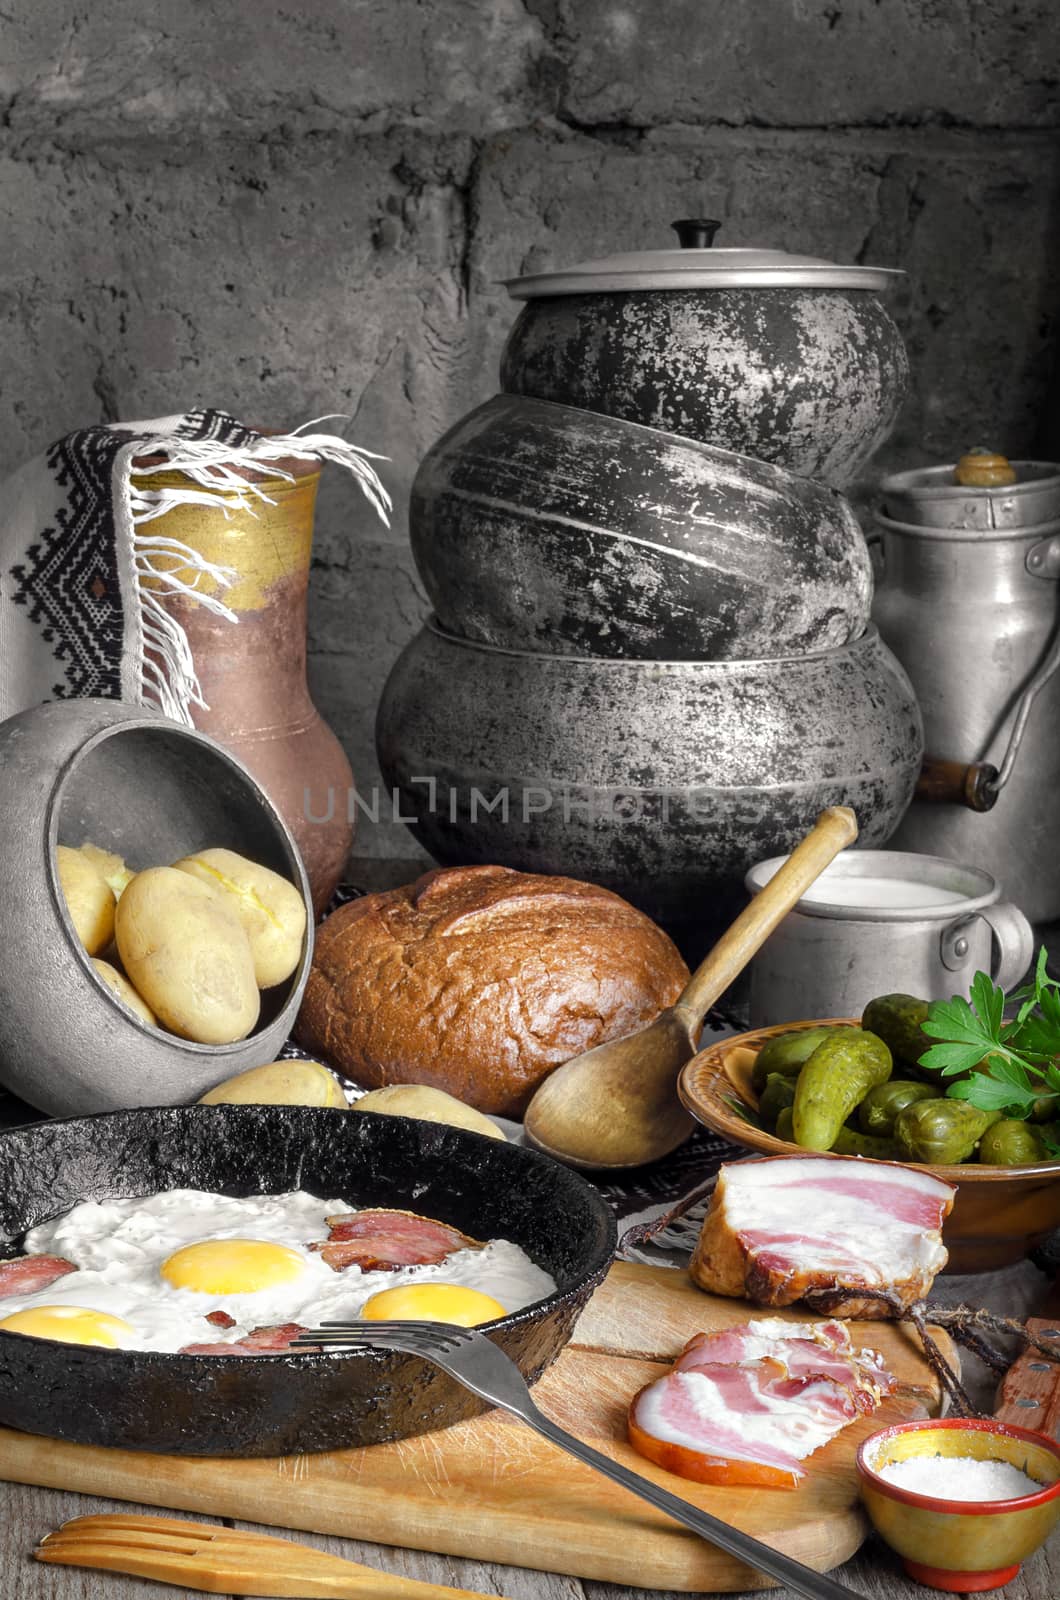 Bacon and eggs, boiled potatoes, pickles. On the background of antique dishes and bread.